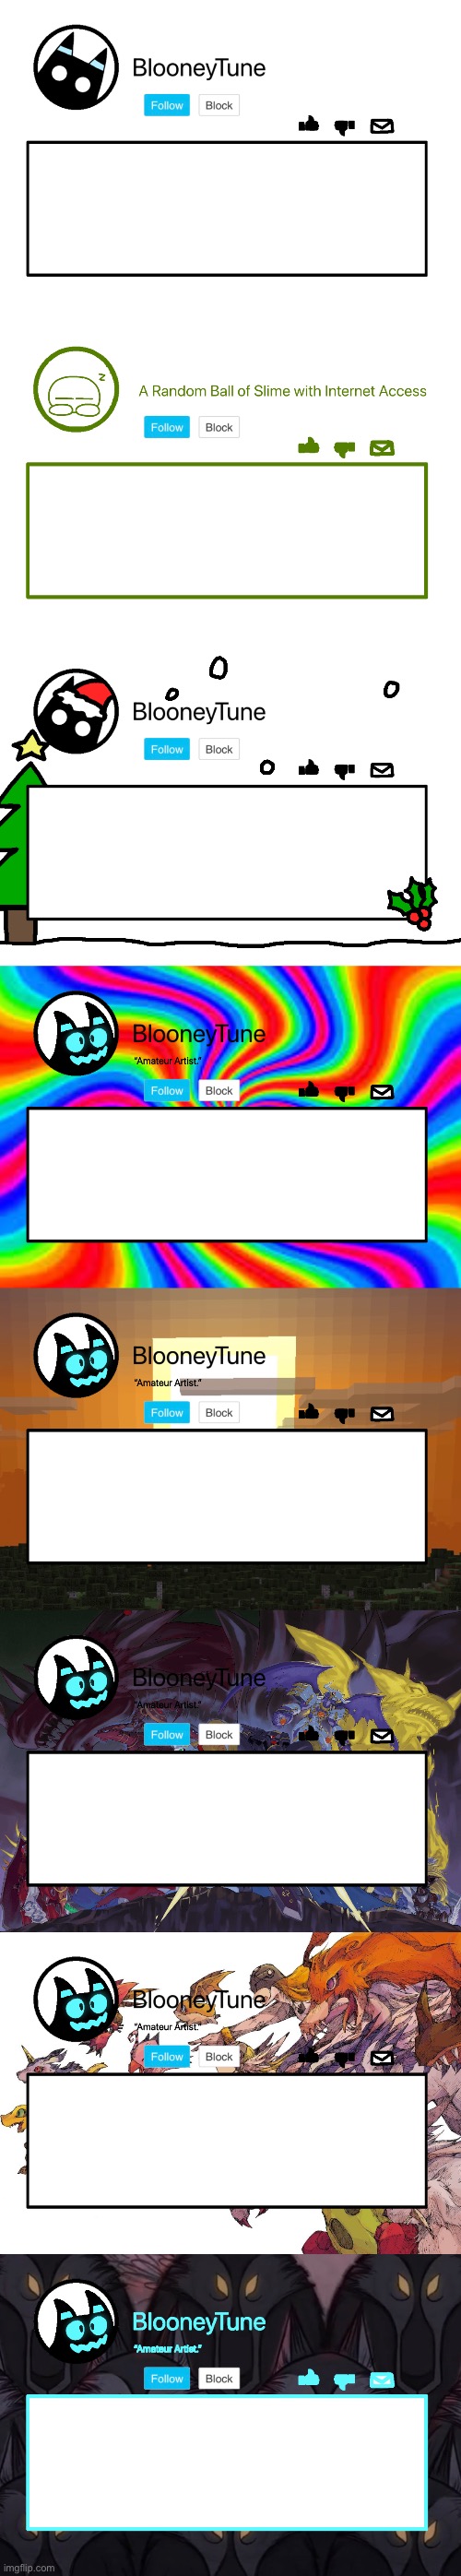 Every template (so far). | image tagged in bloo s announcement,mucky s announcement,bloo s holiday announcement,bloo s better anouncement | made w/ Imgflip meme maker